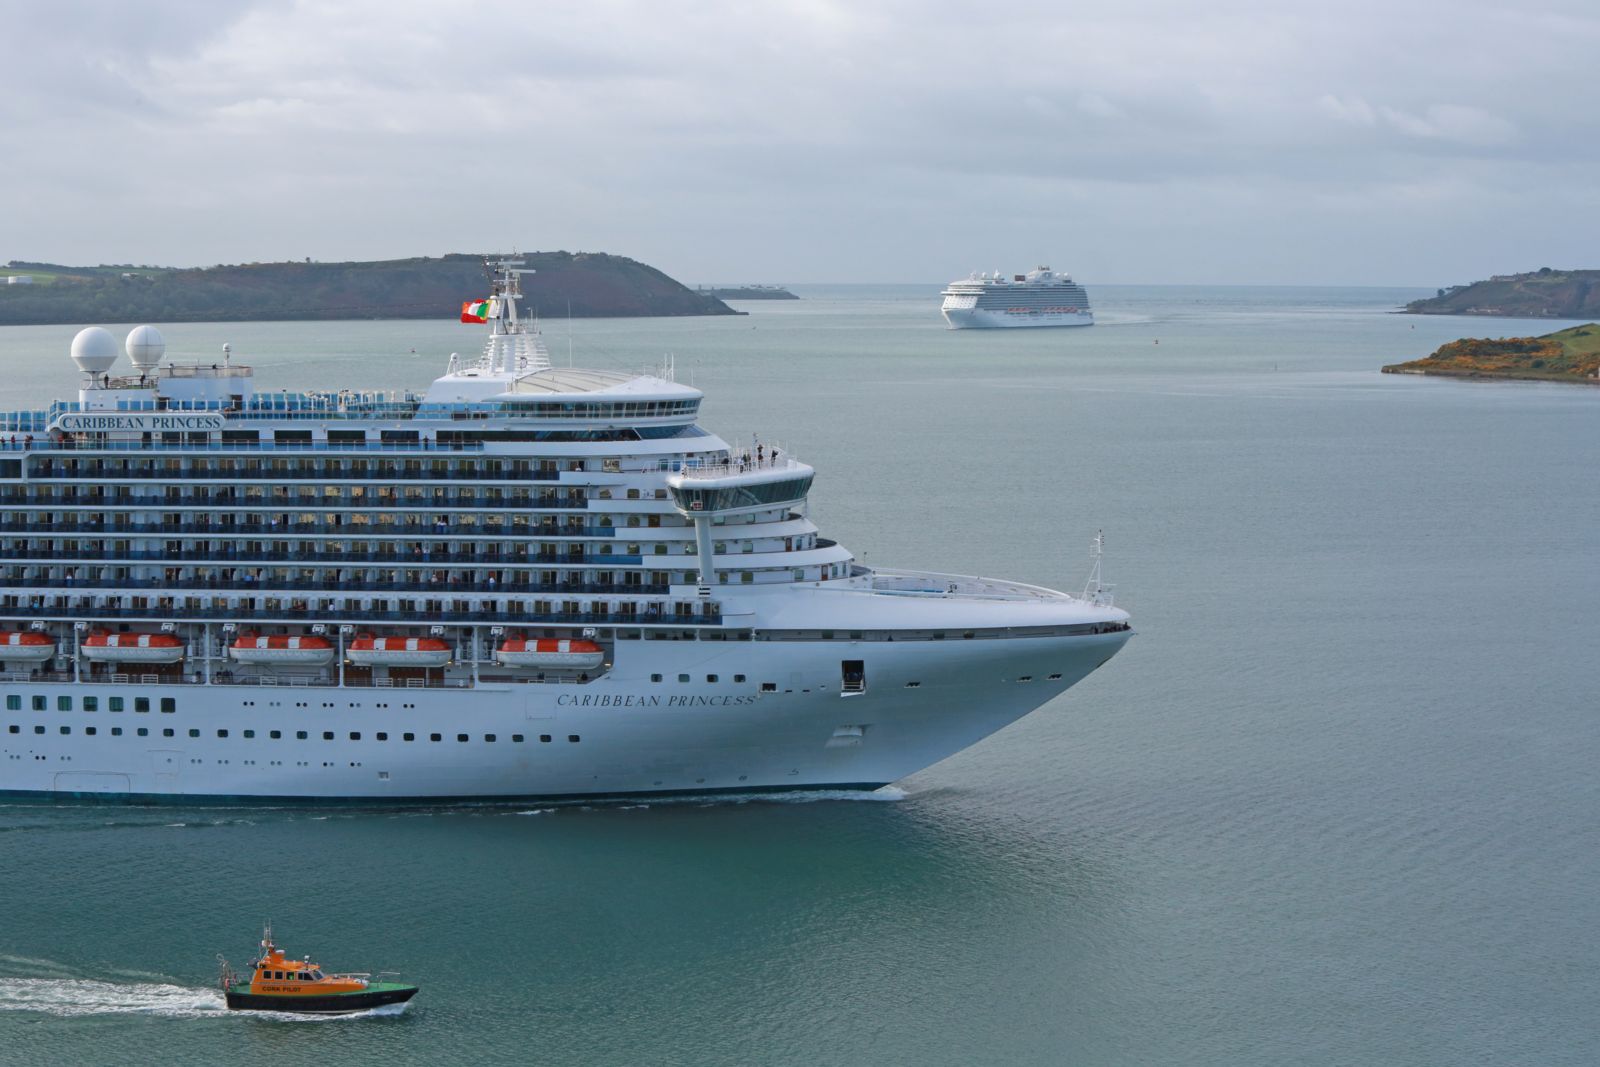 Two cruise ships in Cork Harbour